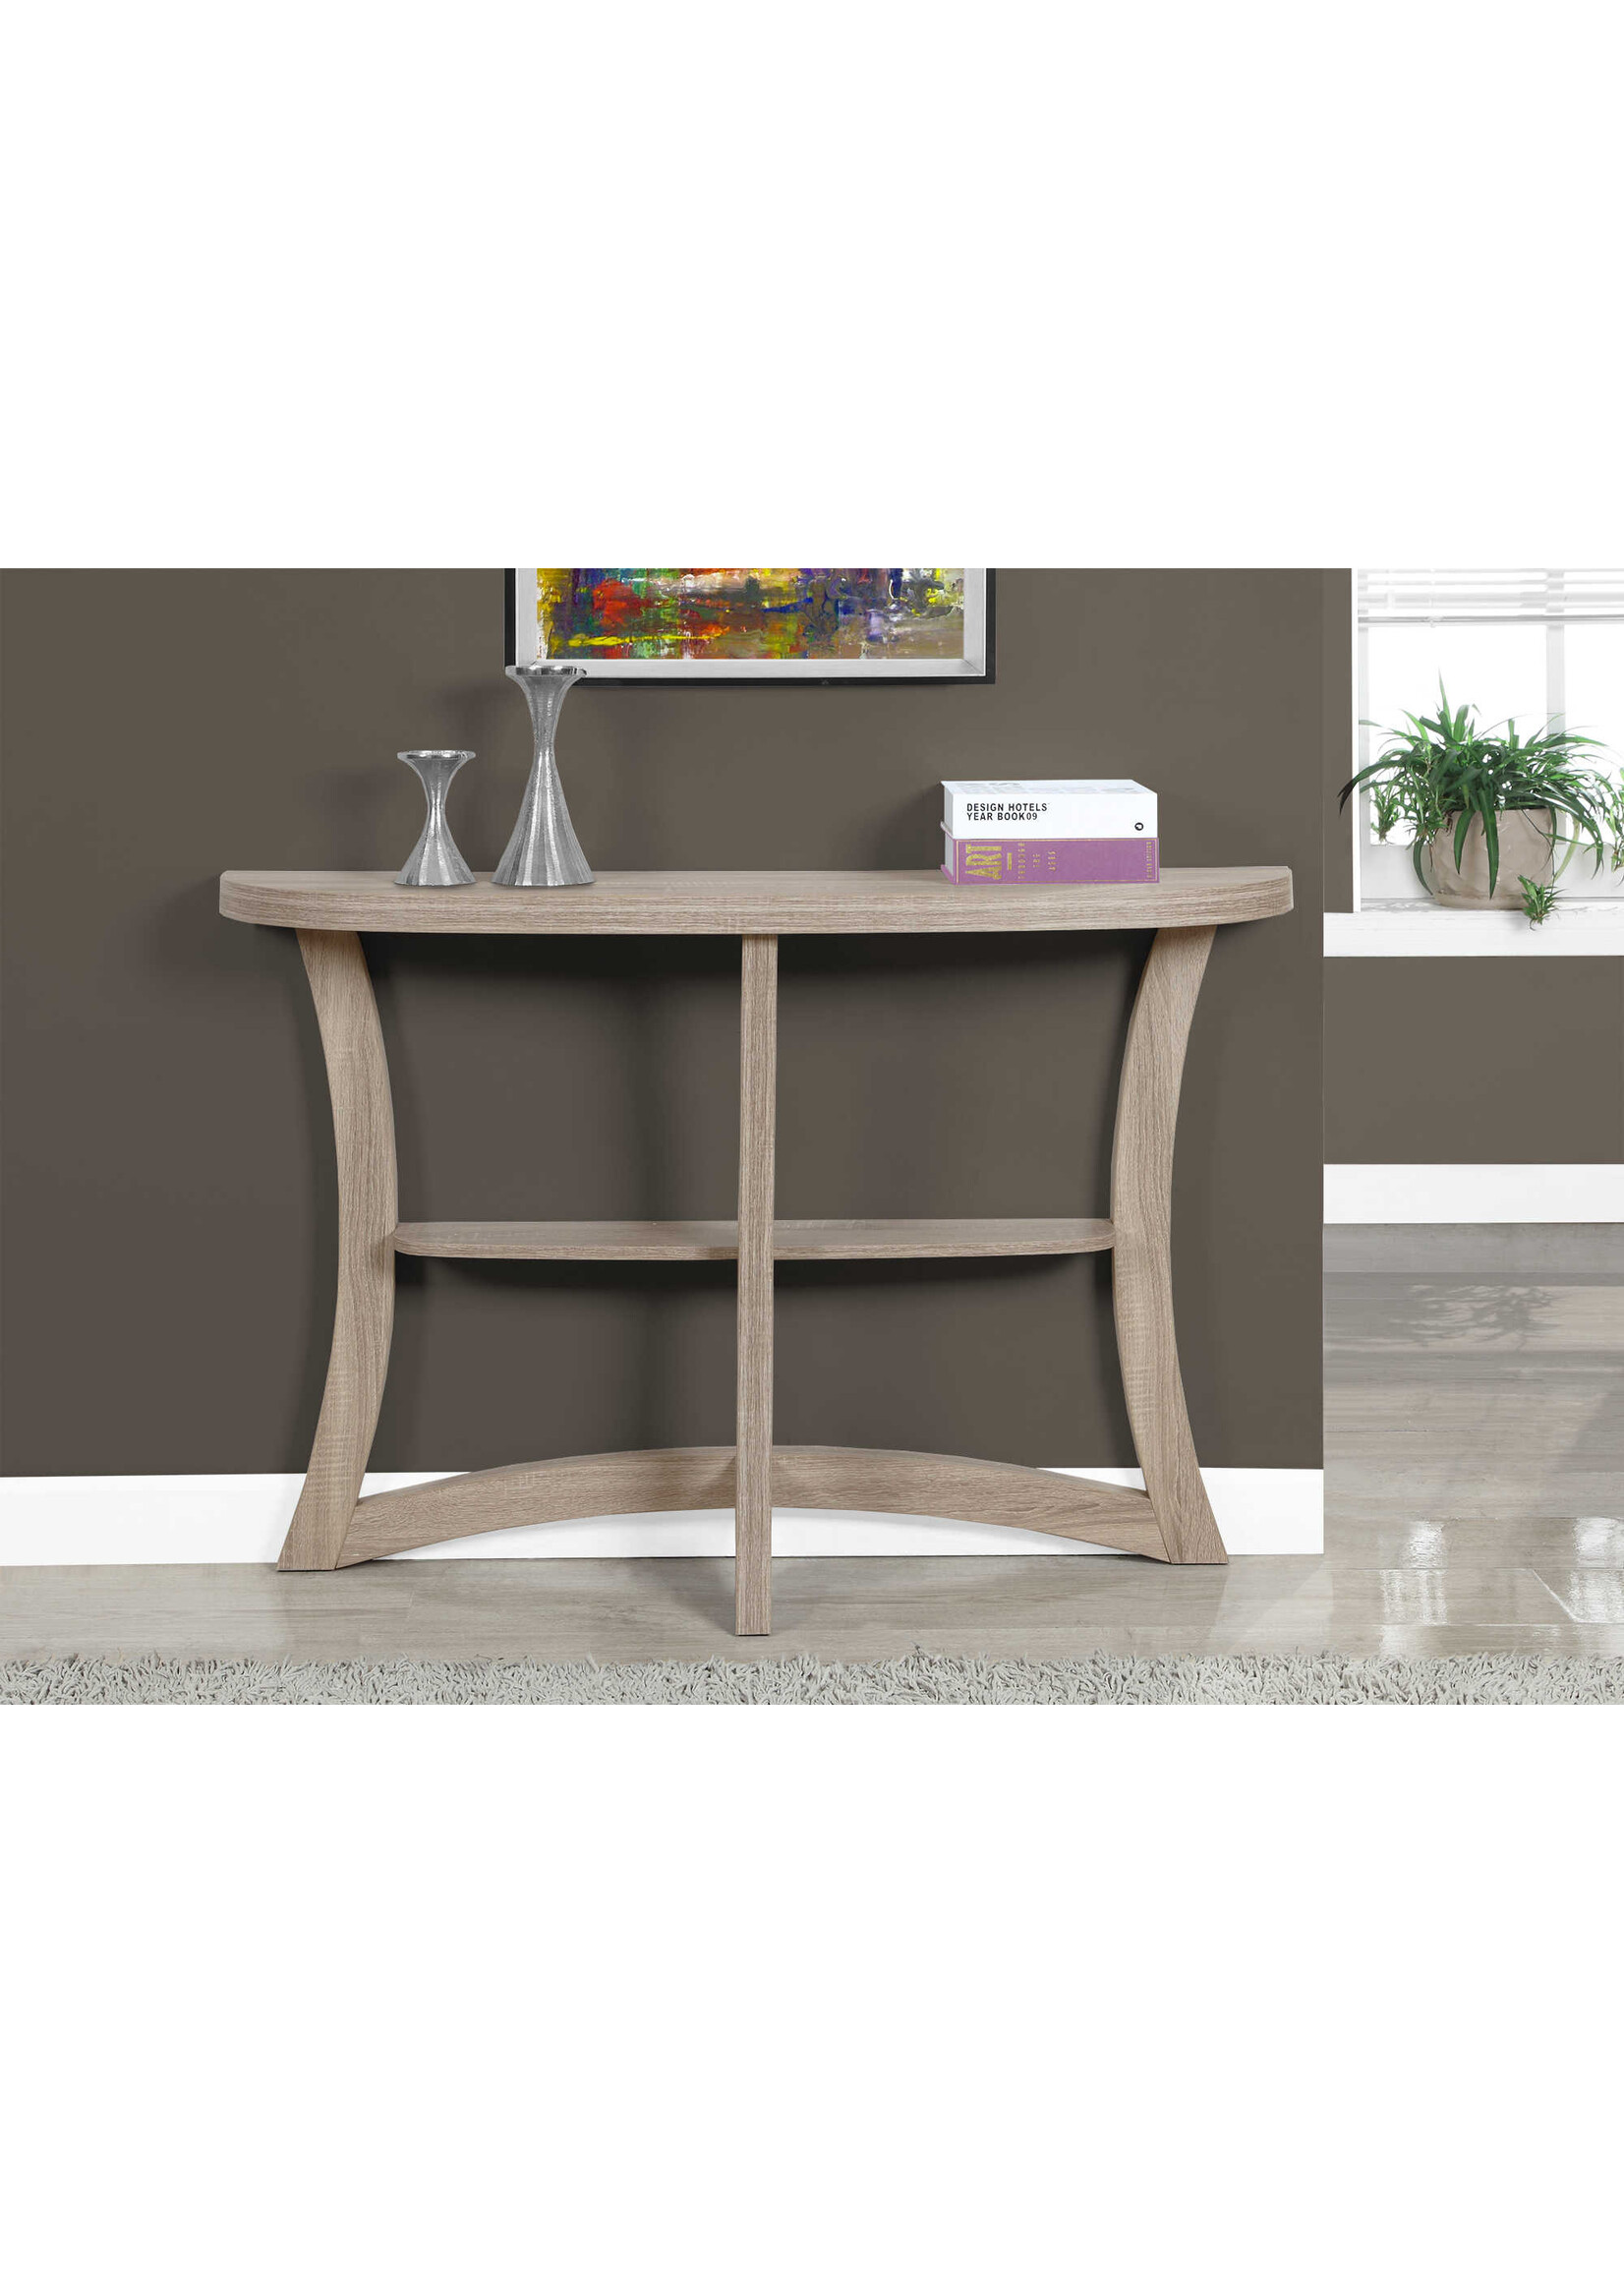 TABLE D'APPOINT - 47"L / CONSOLE D'ENTREE TAUPE FONCE